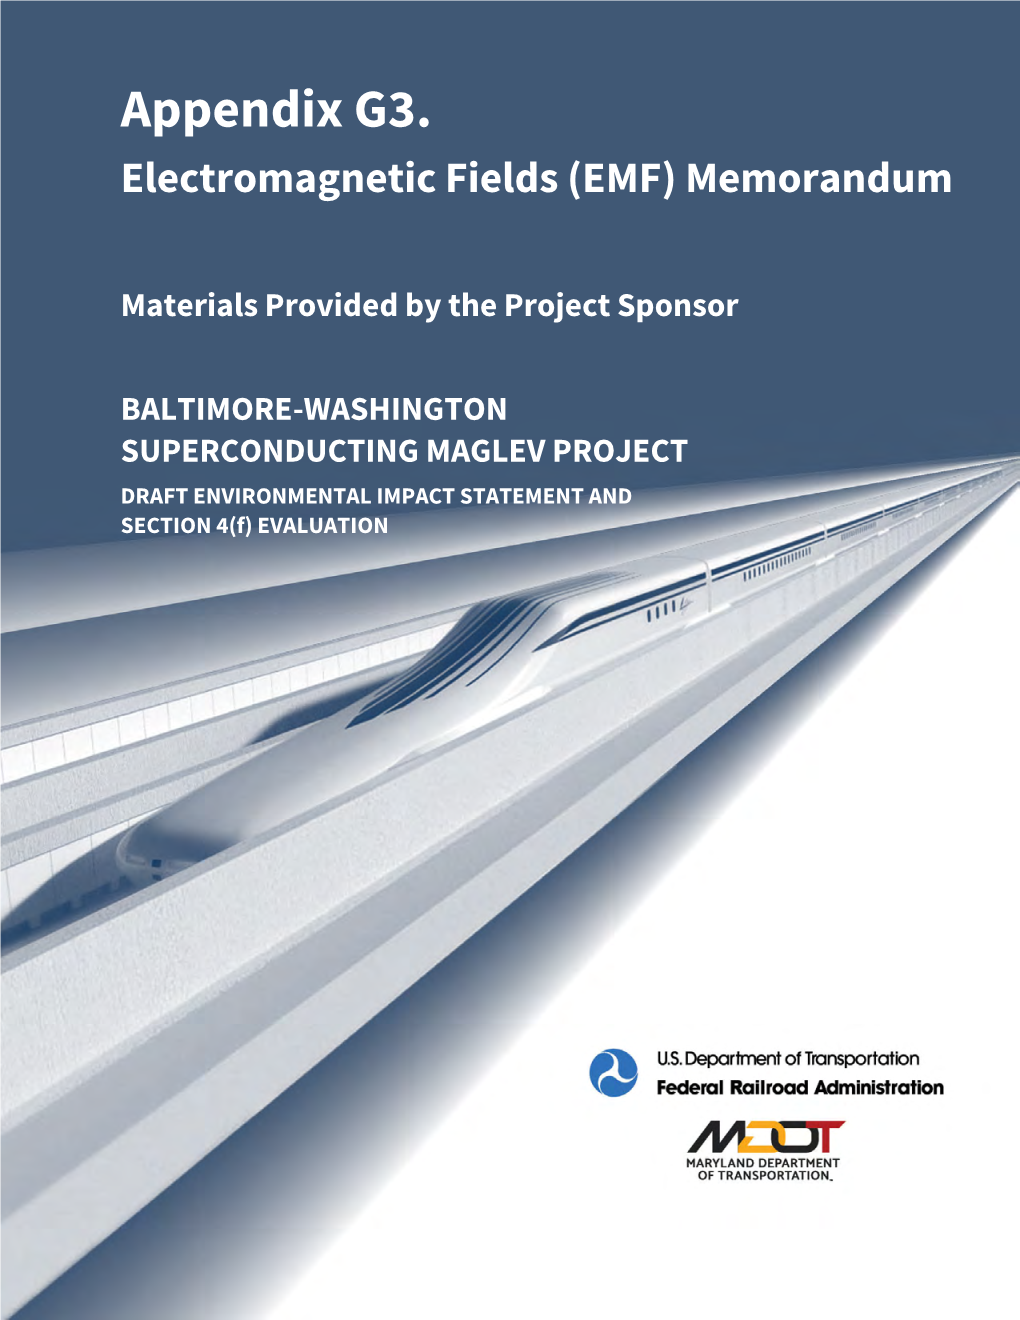 BALTIMORE-WASHINGTON SUPERCONDUCTING MAGLEV PROJECT DRAFT ENVIRONMENTAL IMPACT STATEMENT and SECTION 4(F) EVALUATION